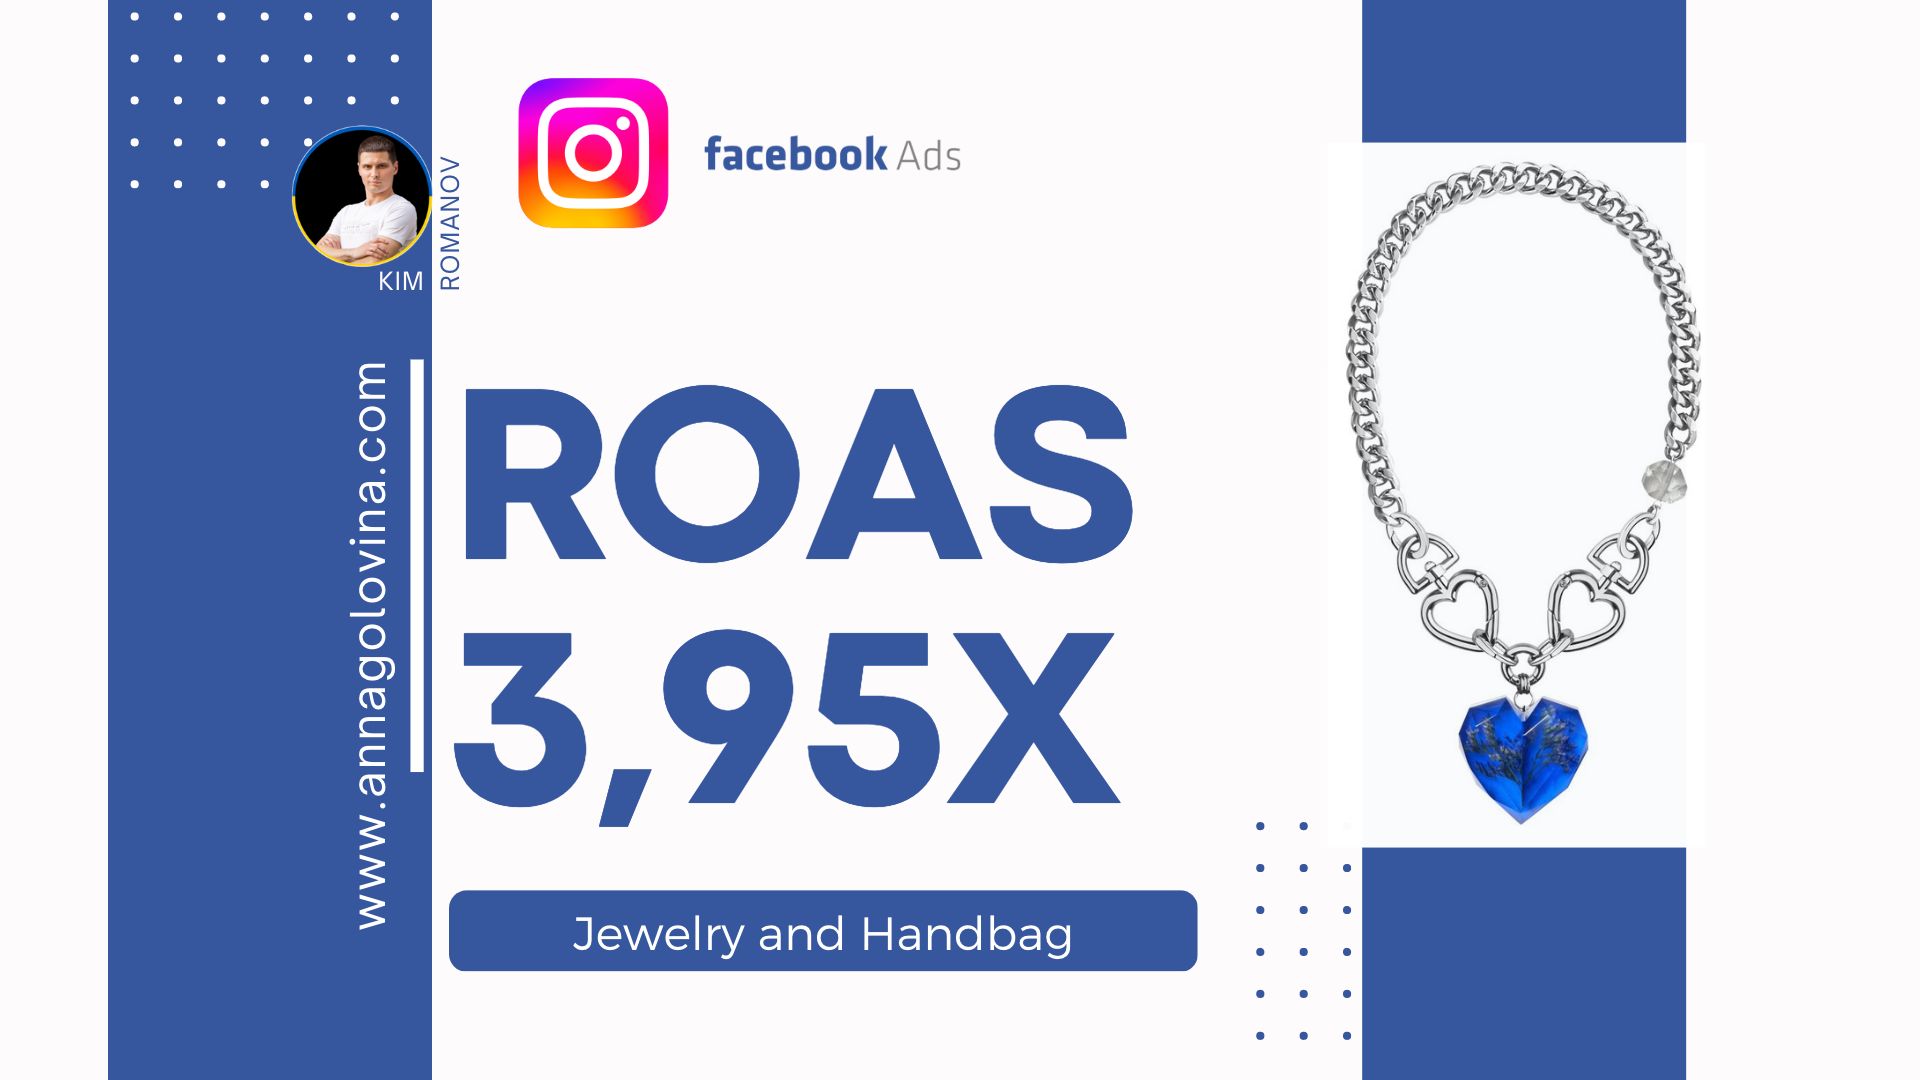 Explore Jewelry Store Ads Case Study and how I increased sales for business from scratch, achieving a 3.95x ROAS in just one month.